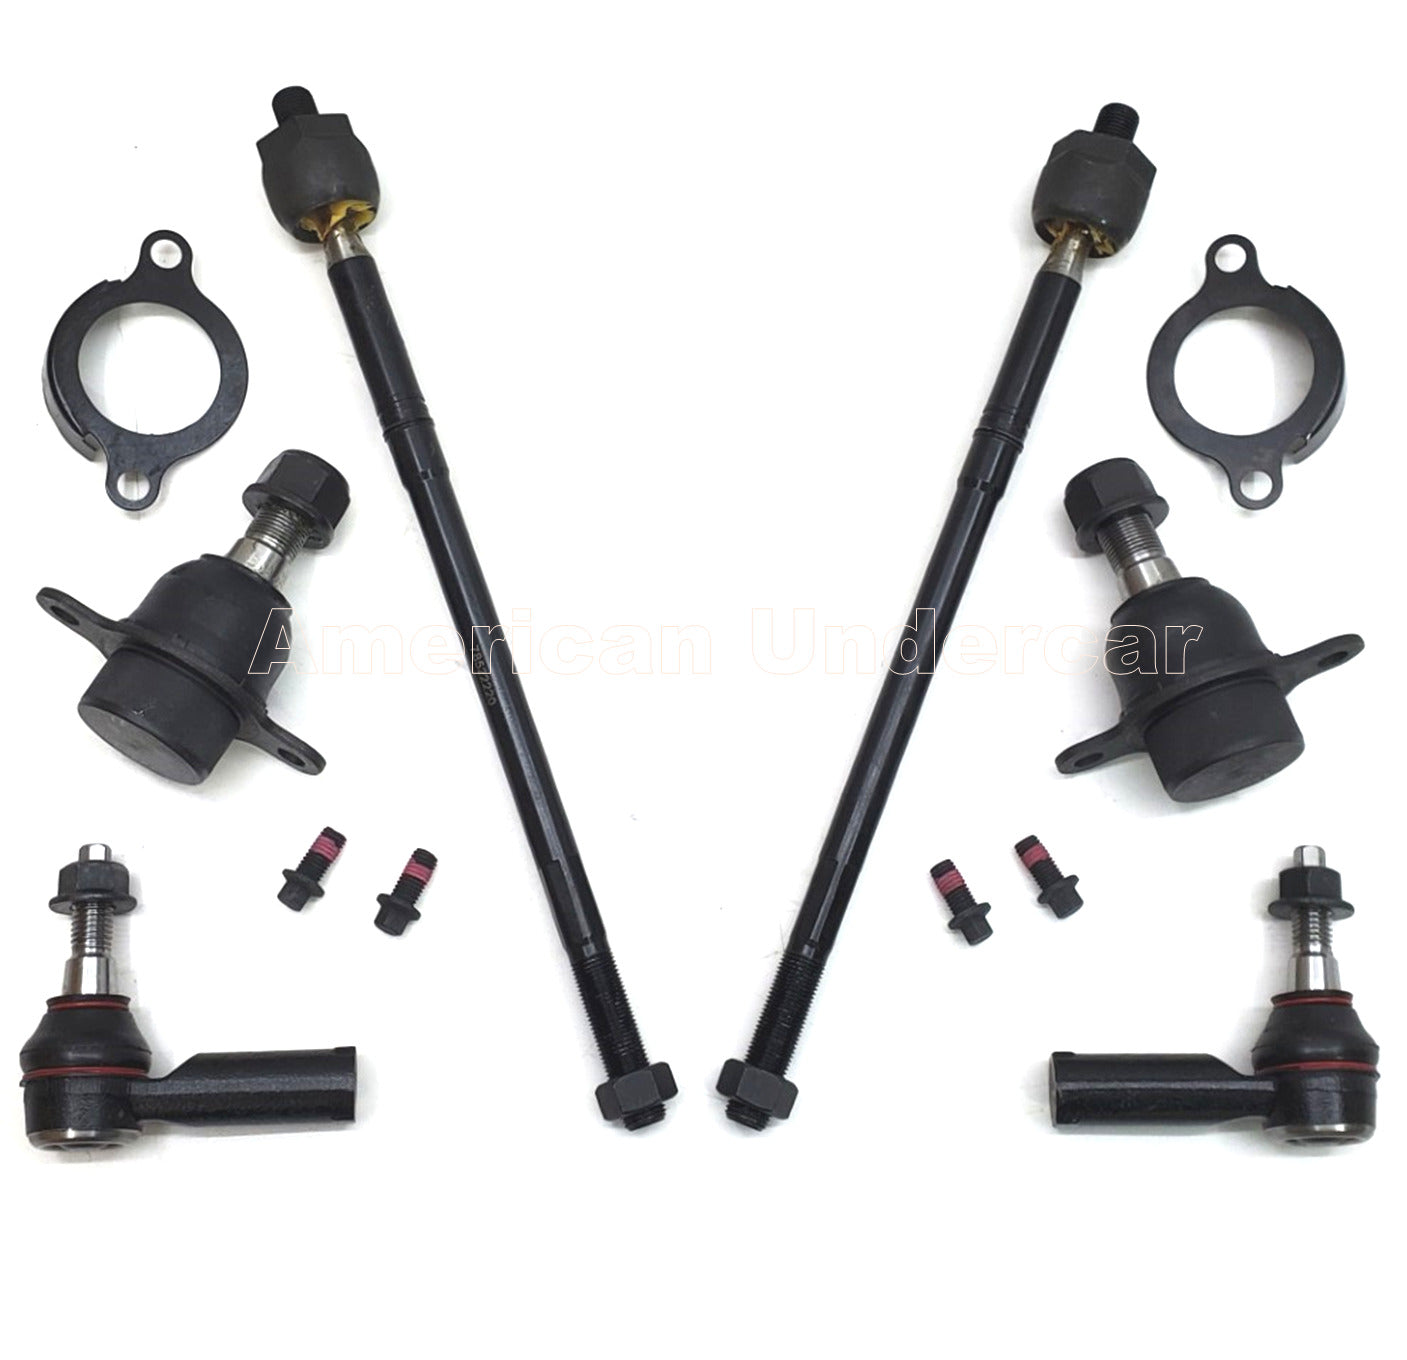 Lifetime Ball Joint Tie Rod Steering Suspension Kit for 2015-2019 Ford Transit 250 2WD